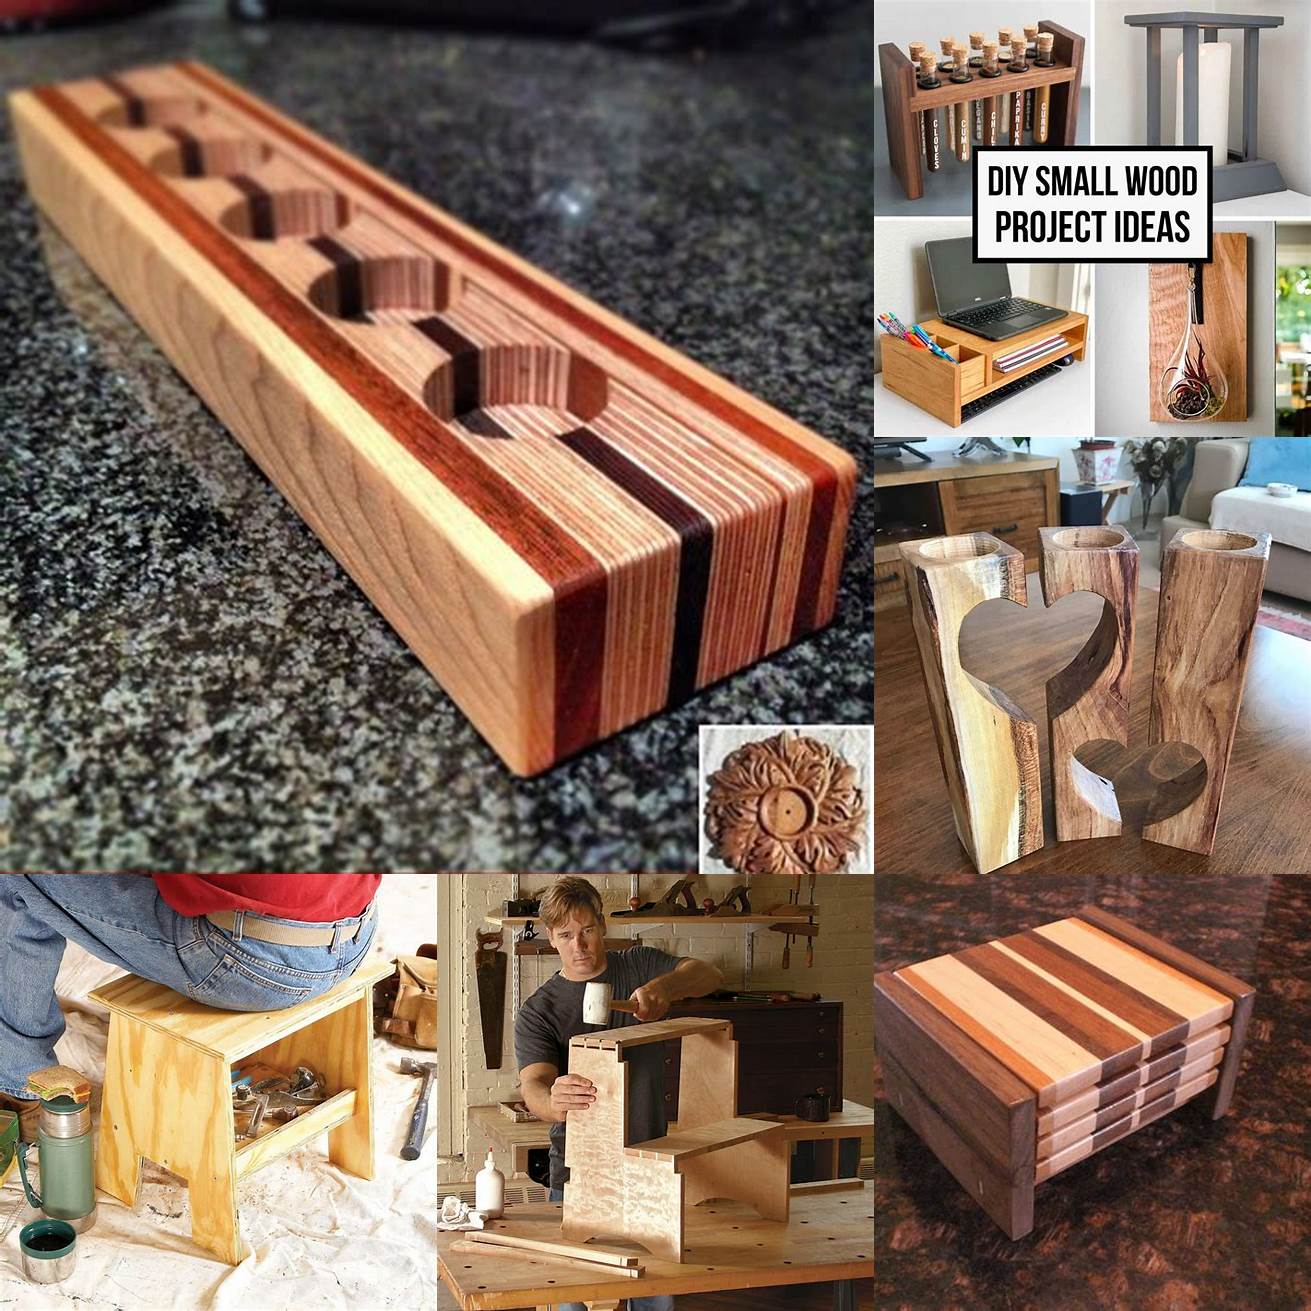 Start with Simple Projects If you are new to woodworking start with simple projects that are easy to complete As you gain experience you can move on to more complex pieces